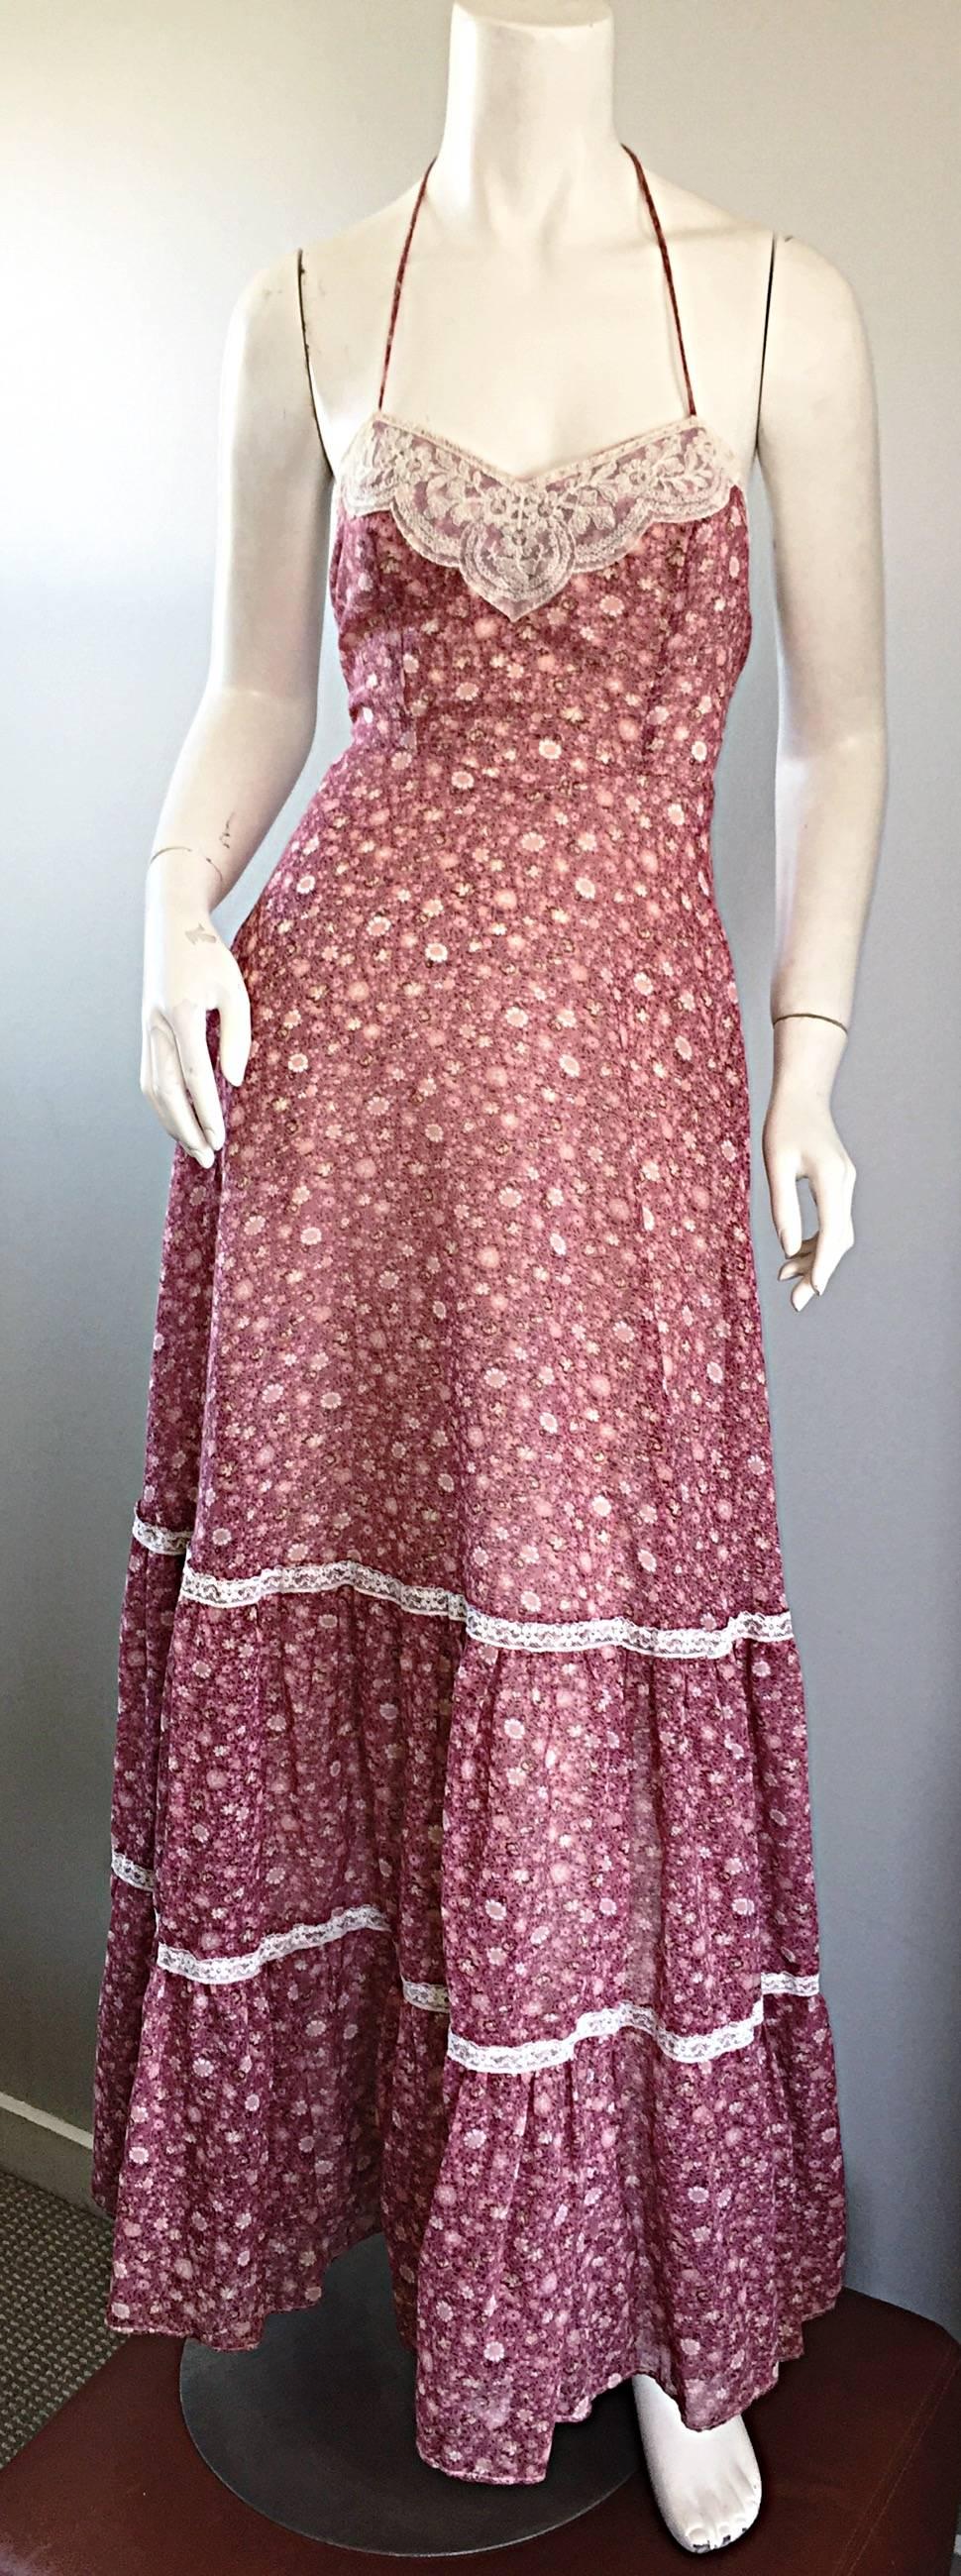 Vintage Boho 1970s Cotton Voile Raspberry Pink and Ivory Lace Halter Maxi Dress 4